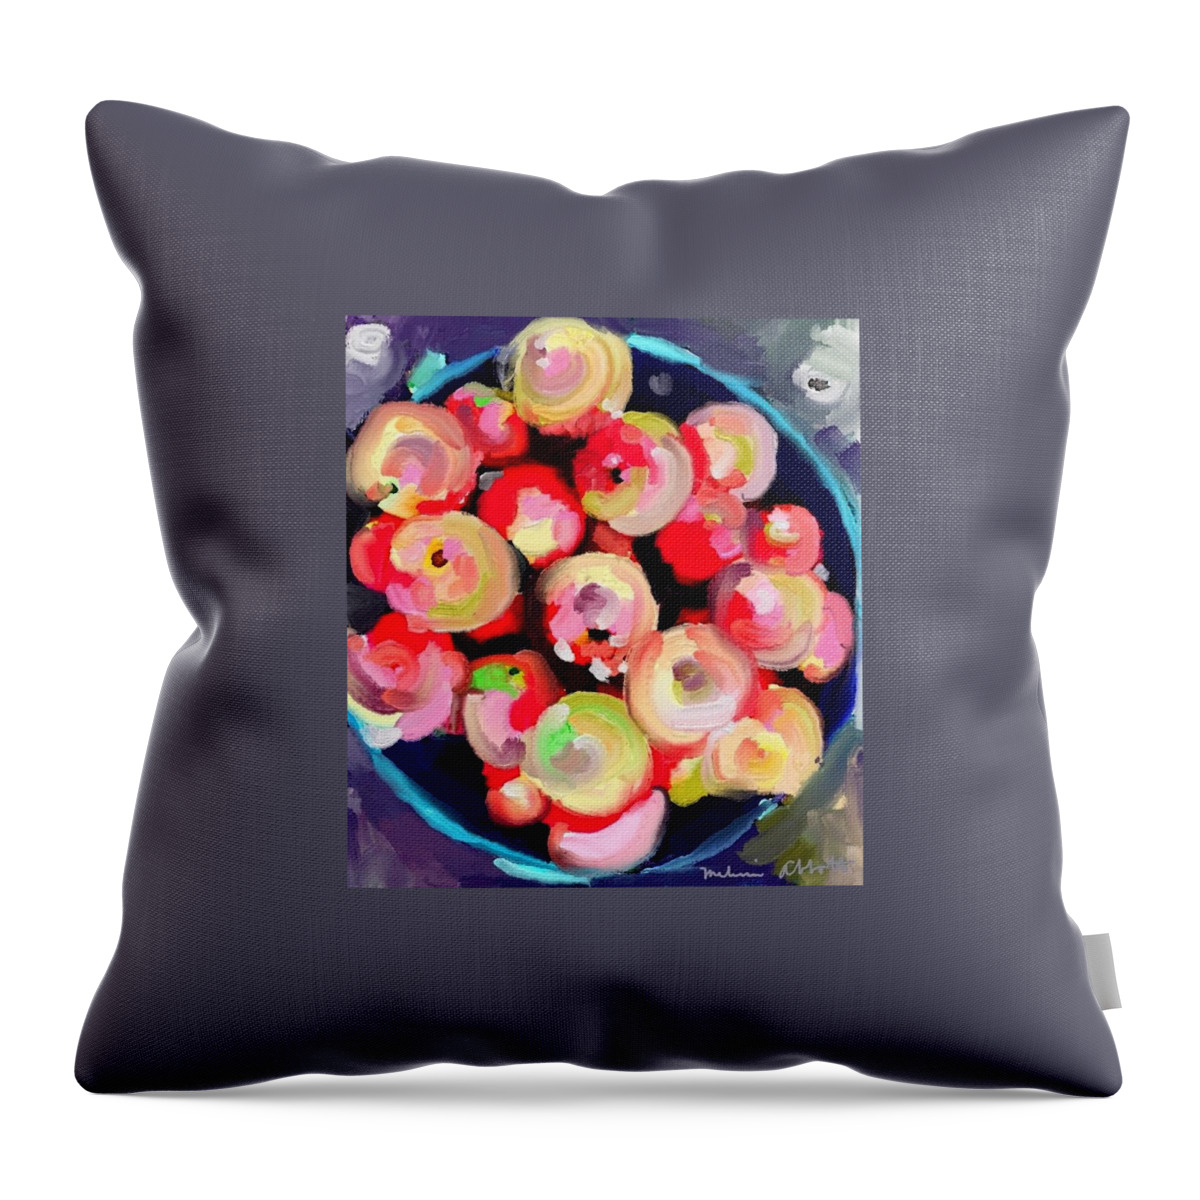 Apples Throw Pillow featuring the photograph Basket of Apples at Rockport Farmer's Market by Melissa Abbott